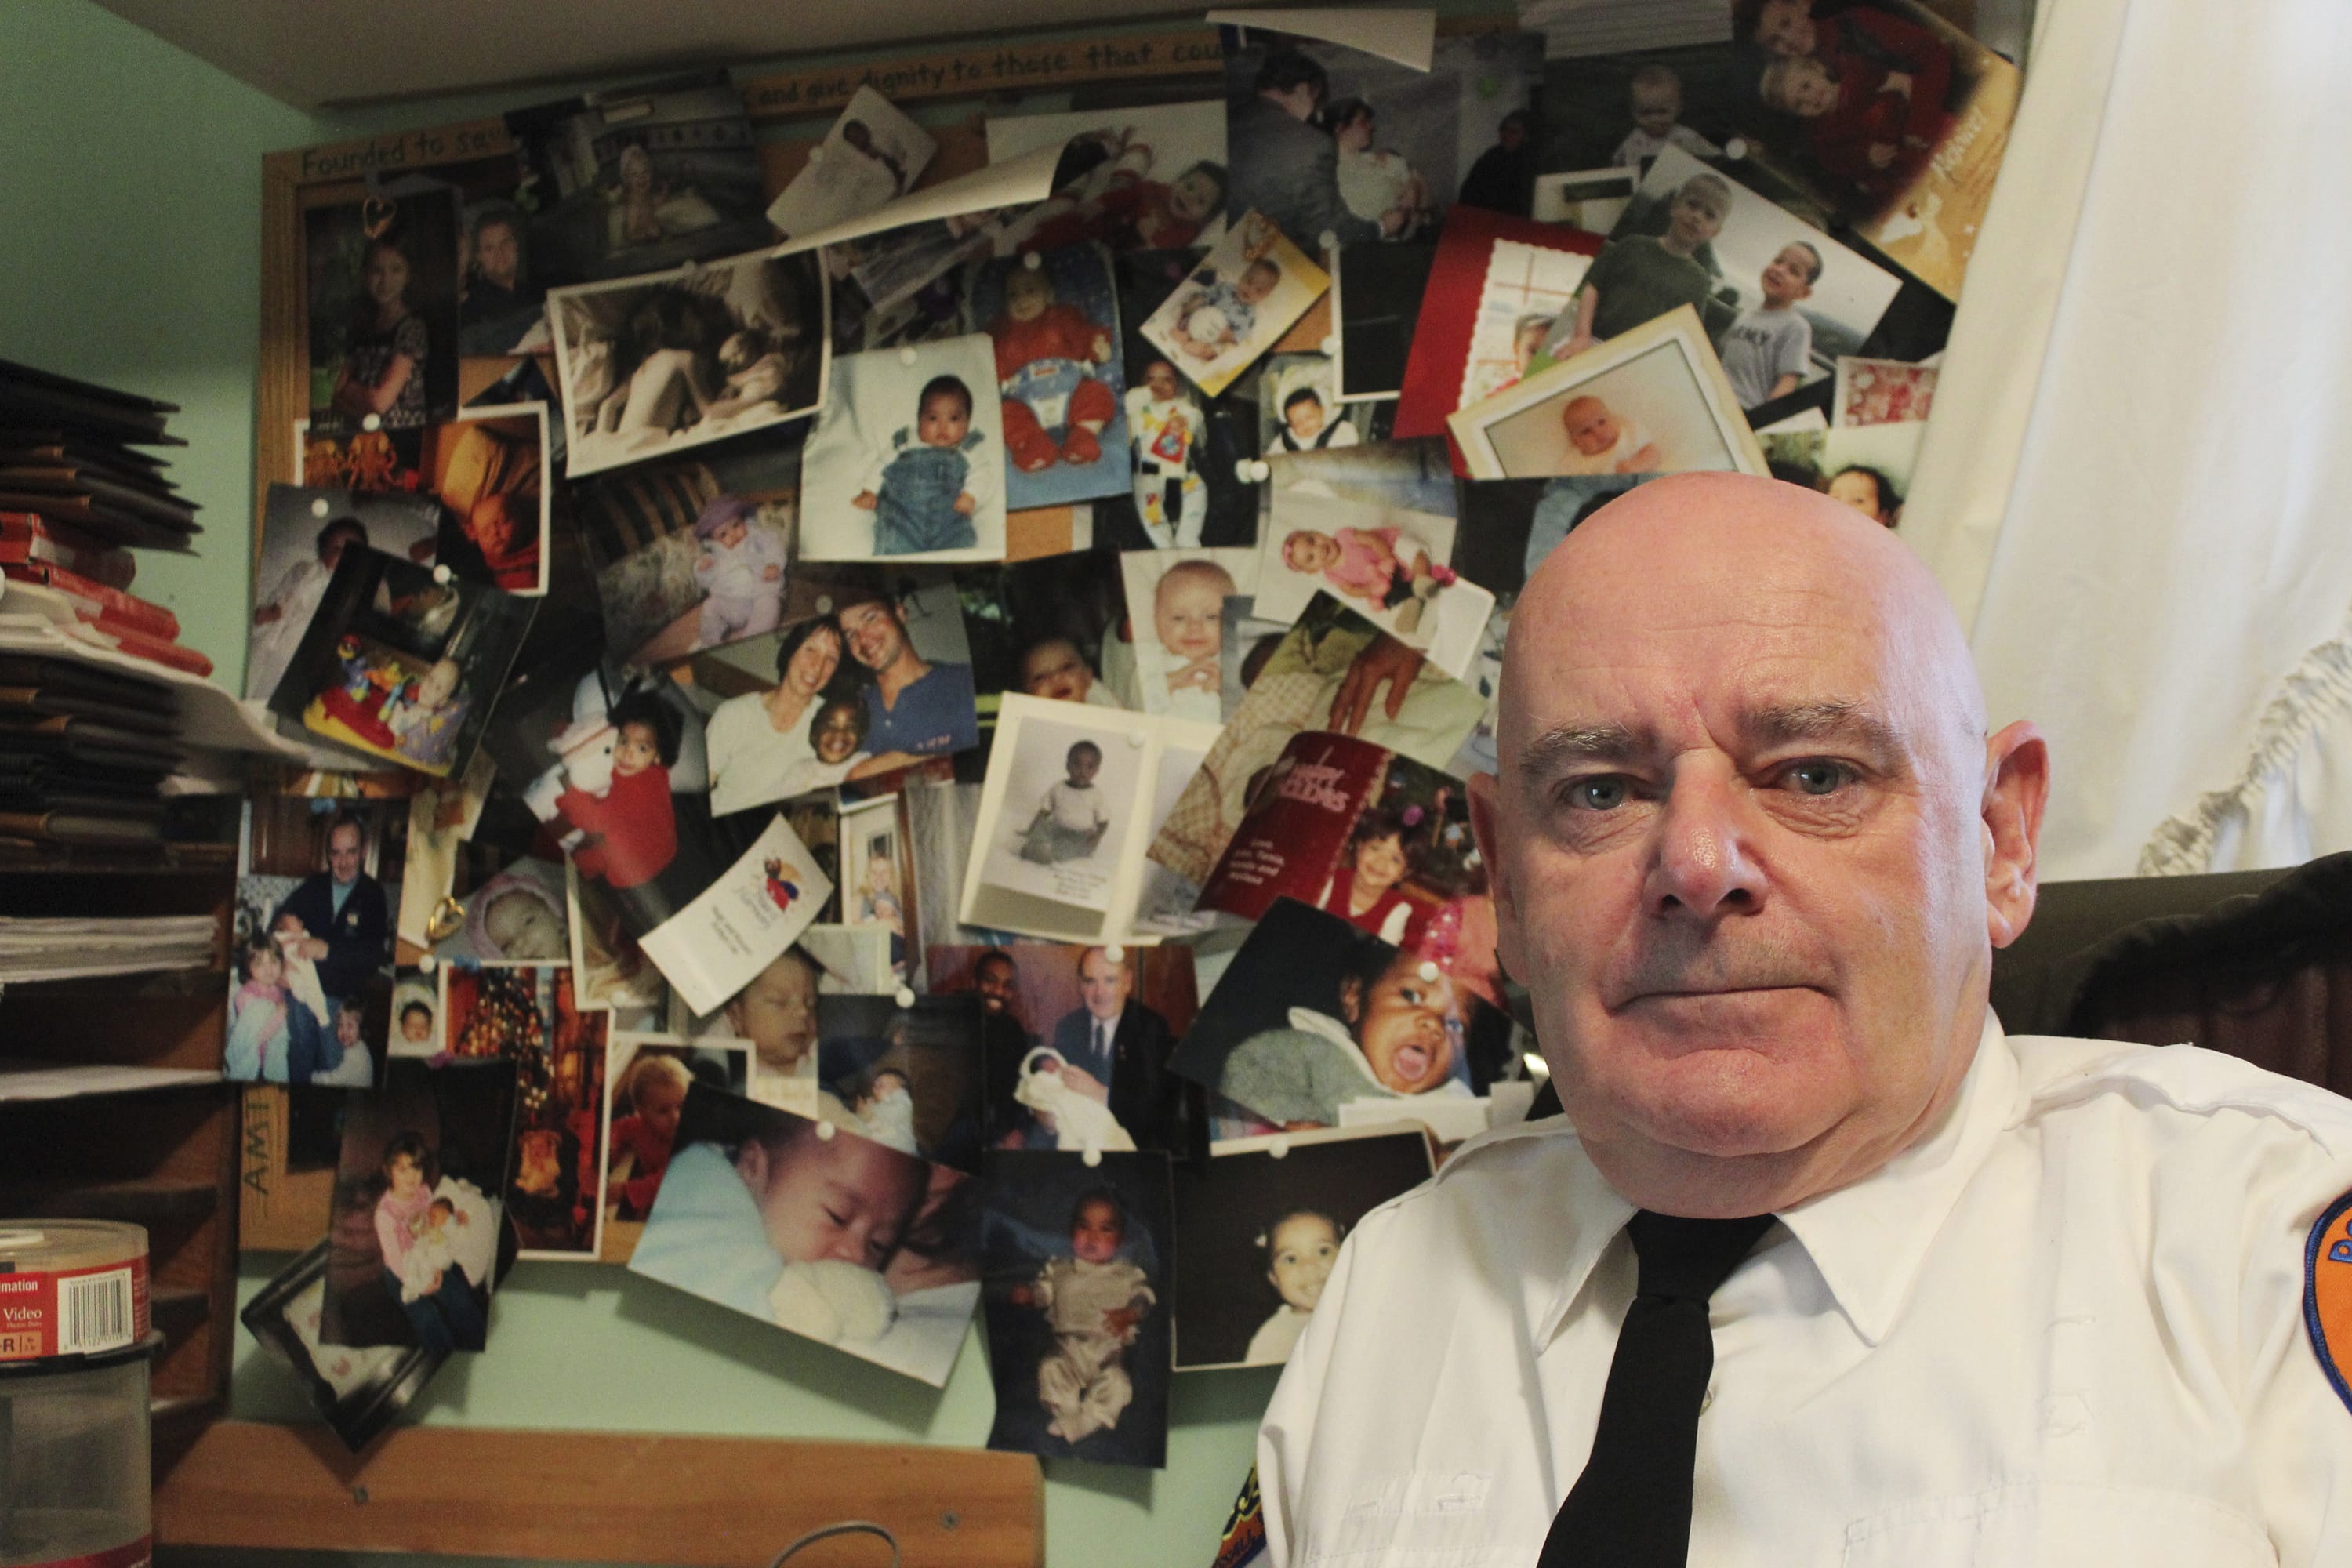 In this Dec. 12, 2016 photo, Tim Jaccard sits in front of snapshots of some of the children who were safely relinquished under a "Safe Haven" program he started 17 years ago, in Wantagh, N.Y. The retired ambulance medic lobbied legislatures across the country to pass so-called "Safe Haven" laws in all 50 states.